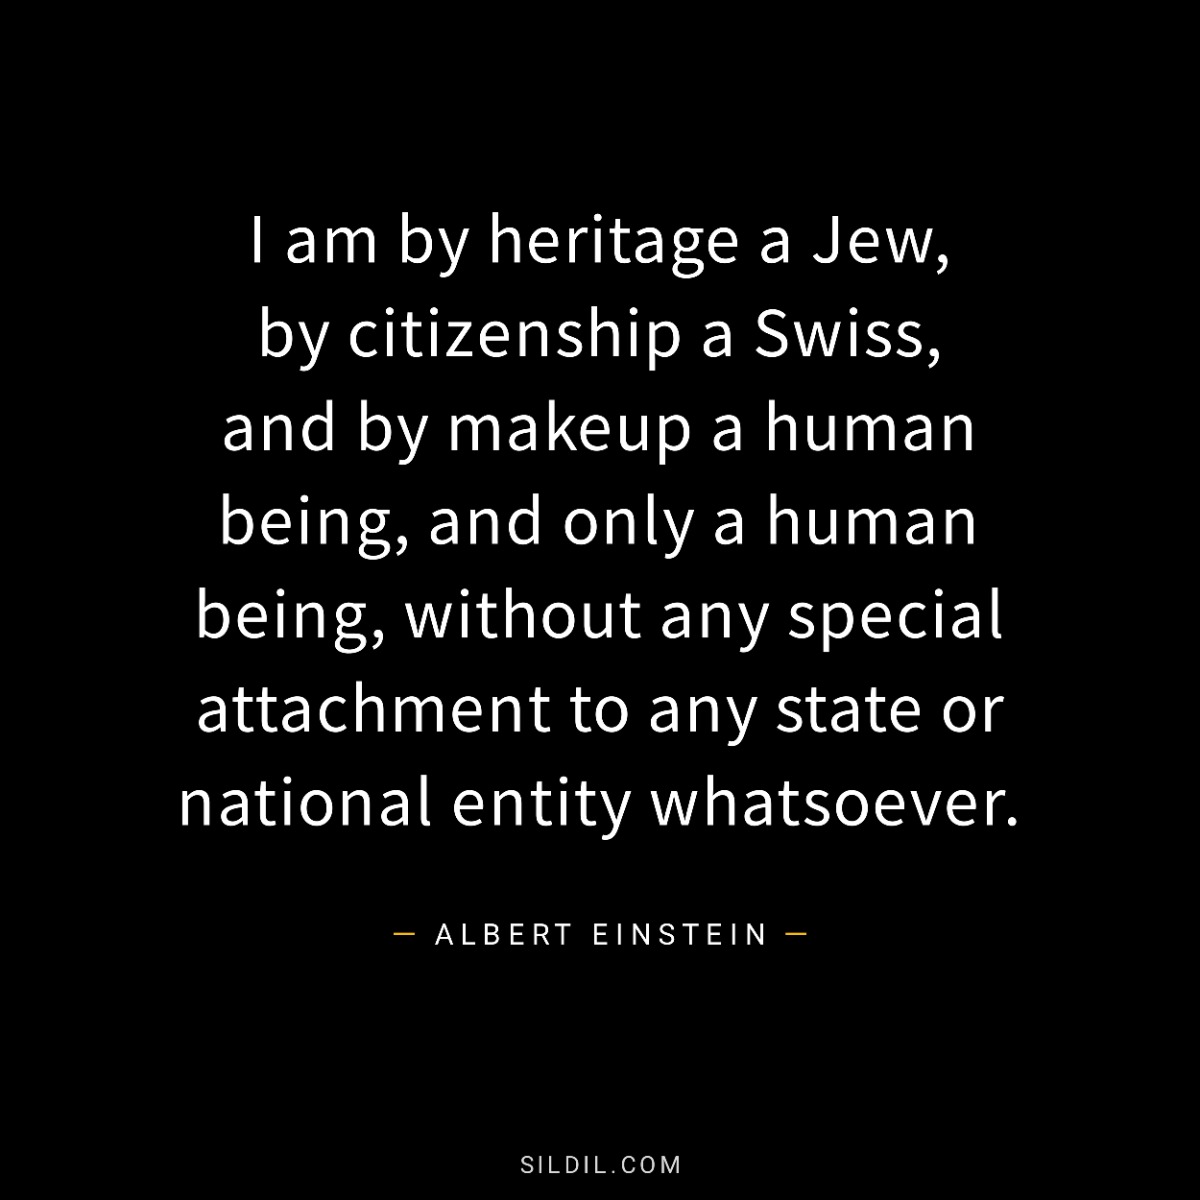 I am by heritage a Jew, by citizenship a Swiss, and by makeup a human being, and only a human being, without any special attachment to any state or national entity whatsoever.